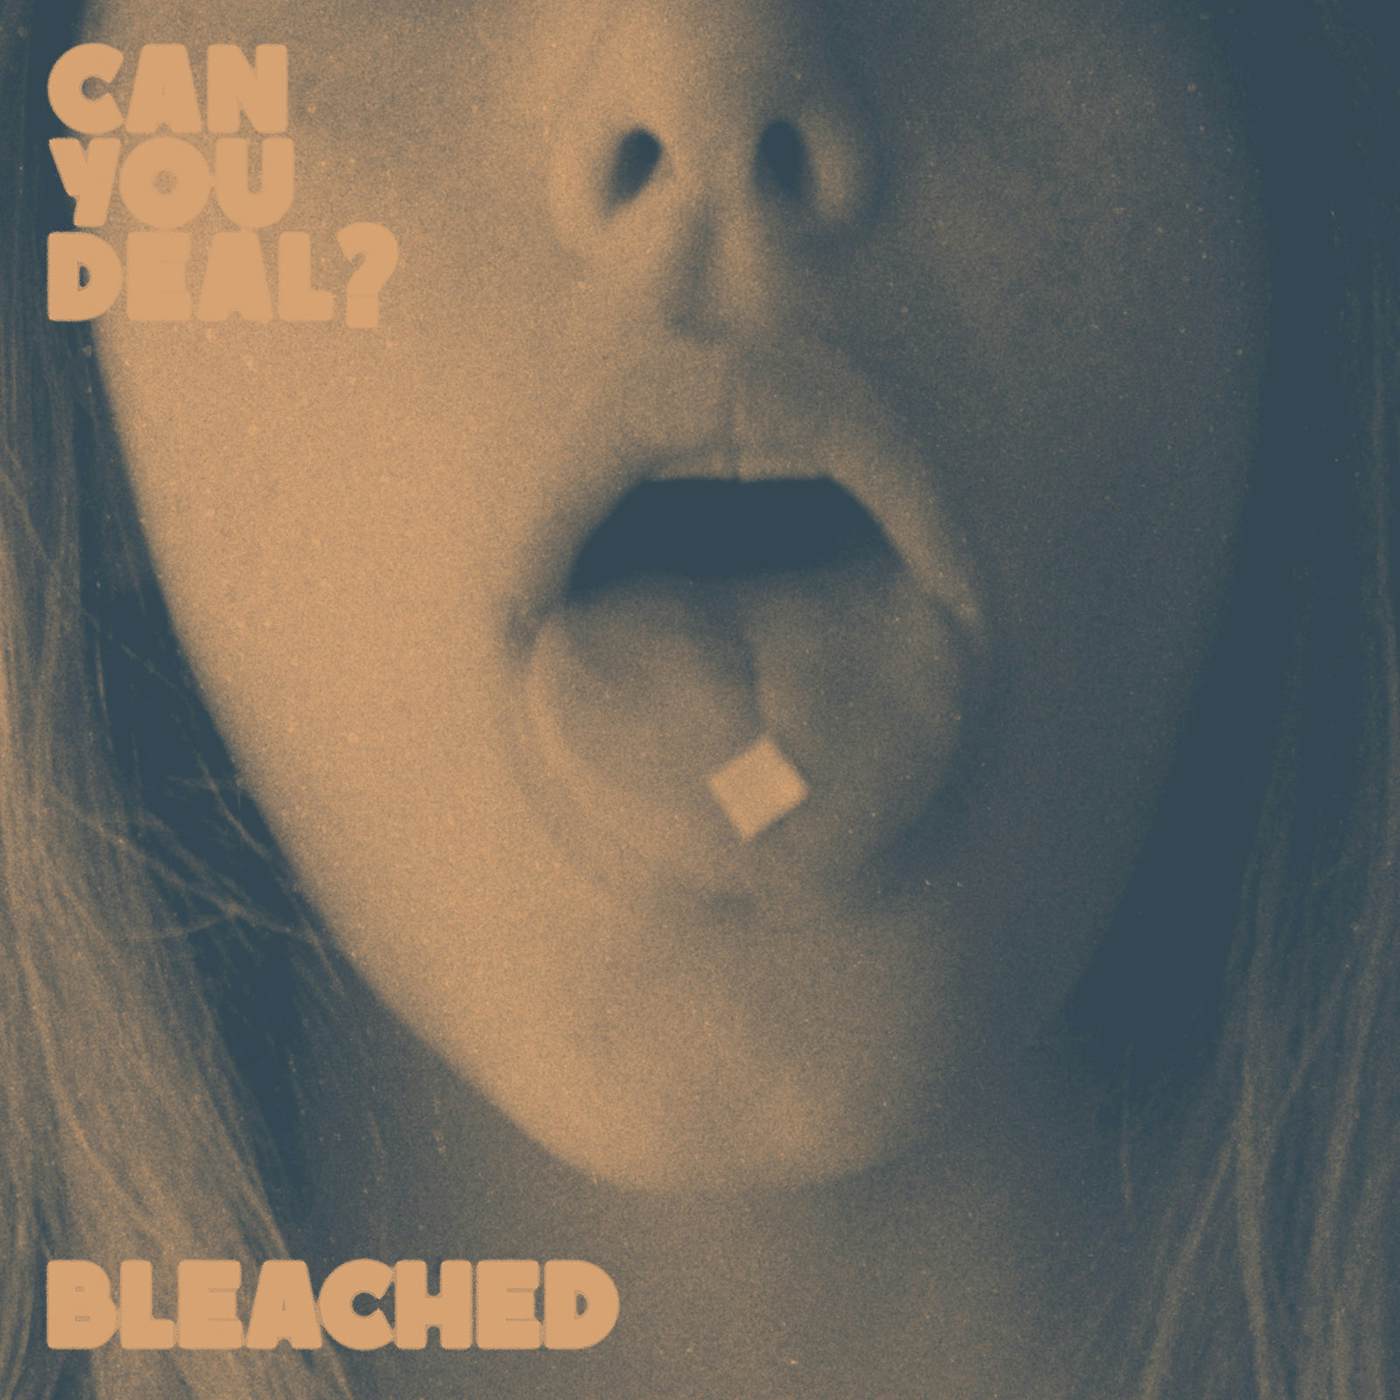 Bleached CAN YOU DEAL Vinyl Record